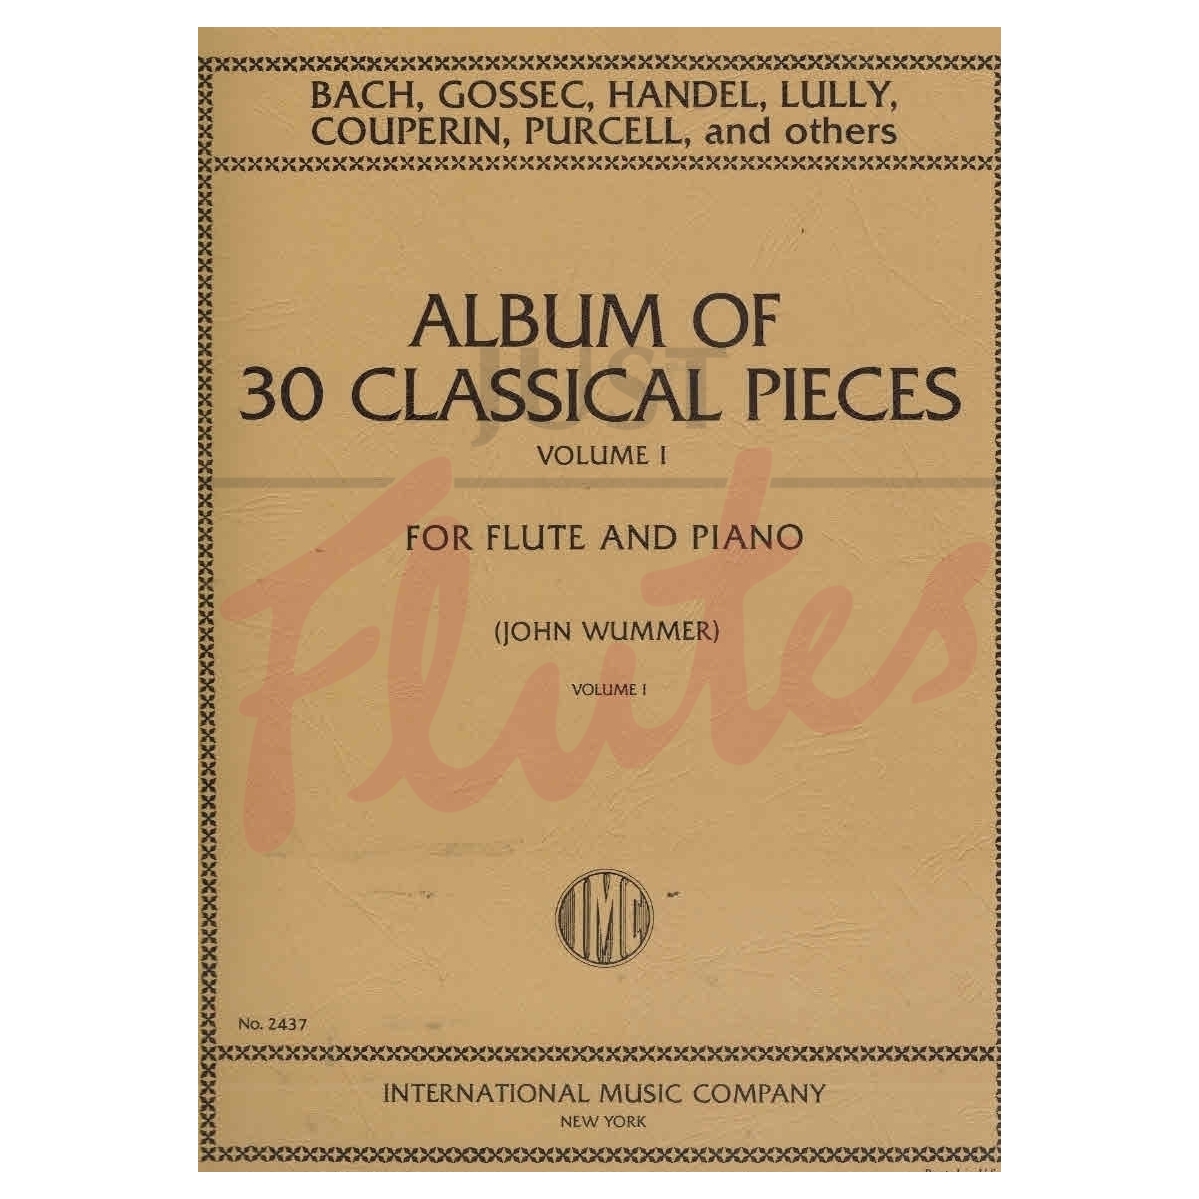 Album of 30 Classical Pieces for Flute and Piano, Volume 1